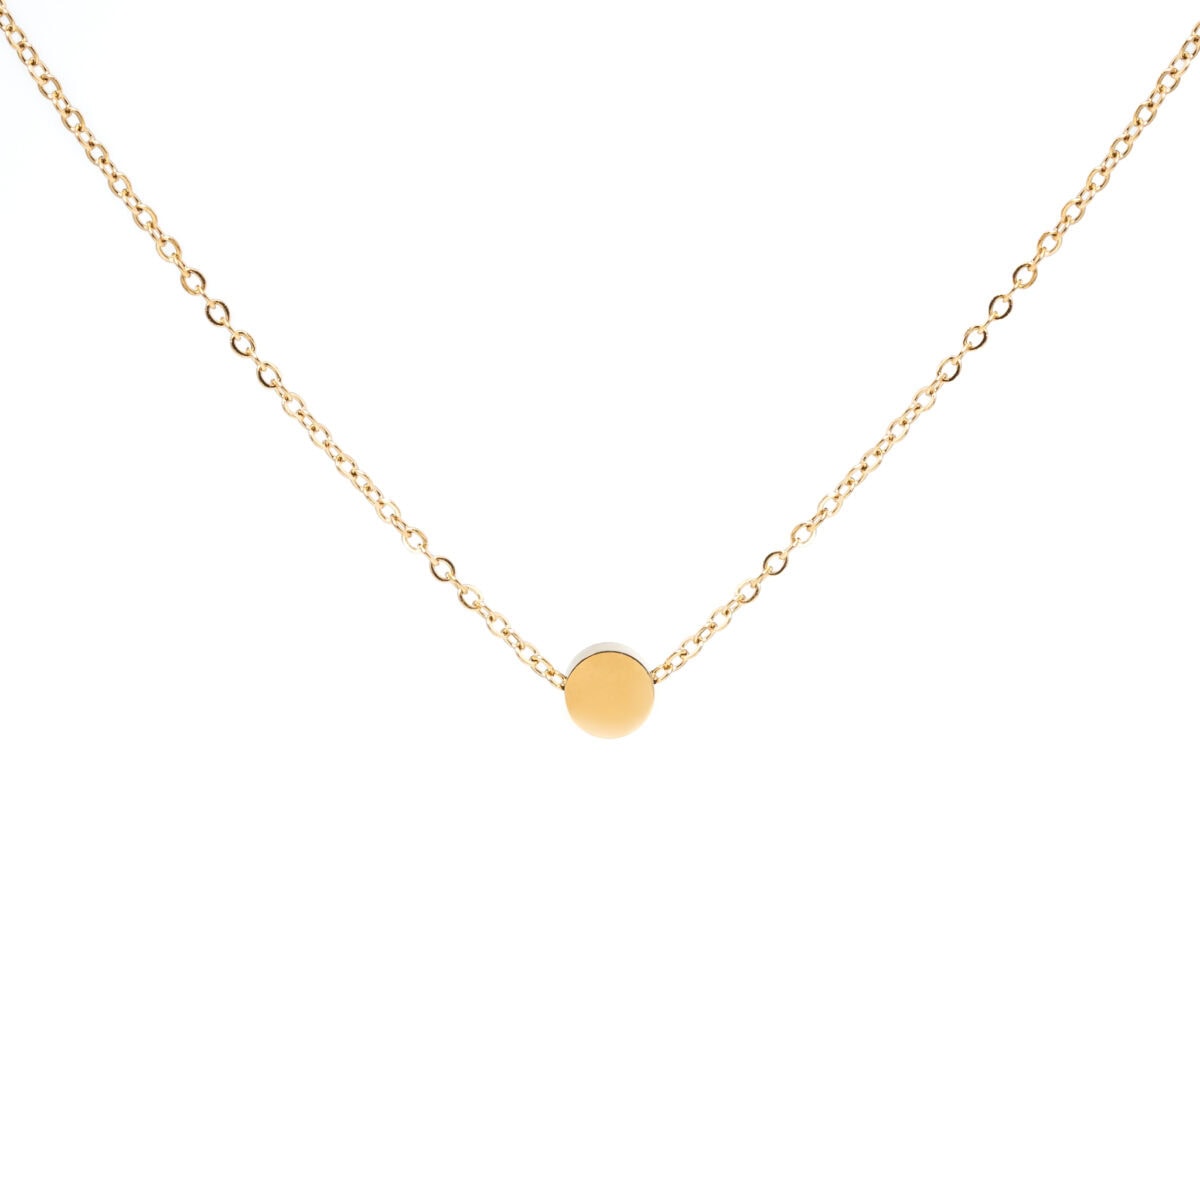 https://m.clubbella.co/product/dainty-sphere-necklace/ Dainty Sphere Necklace (1)